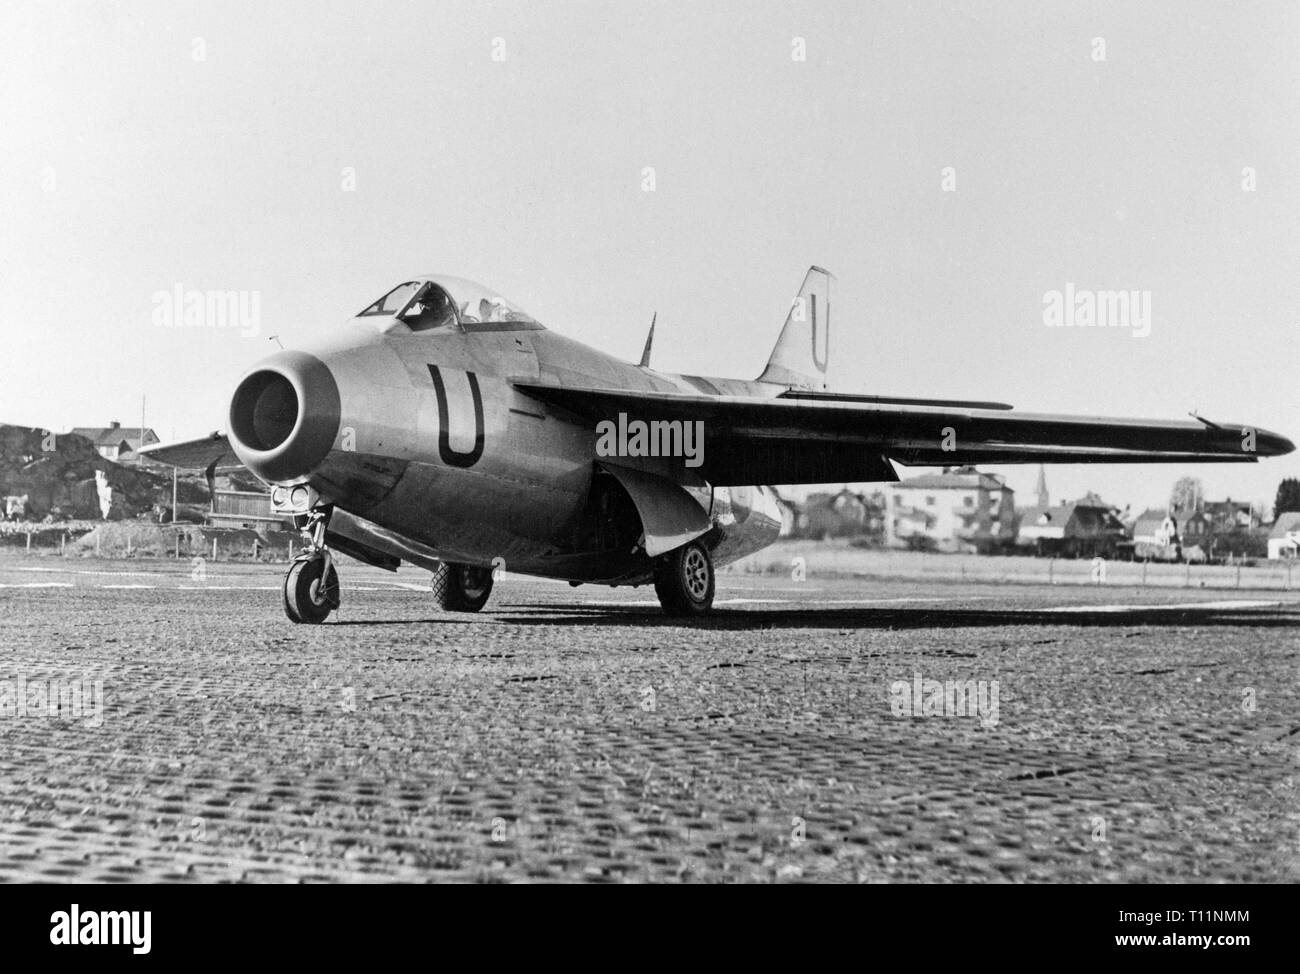 The Saab 29 Tunnan is a Swedish fighter that was designed and manufactured by Saab in the 1940s. It was Sweden's second turbojet-powered combat aircraft, the first having been the Saab 21R; additionally, it was the first Western European fighter to be produced with a swept wing after the Second World War, the Me 262 having been the first during the war. Despite its rotund appearance, from which its name derives, the J 29 was a fast and agile aircraft for its era. It served effectively in both fighter and fighter-bomber roles into the 1970s. Stock Photo